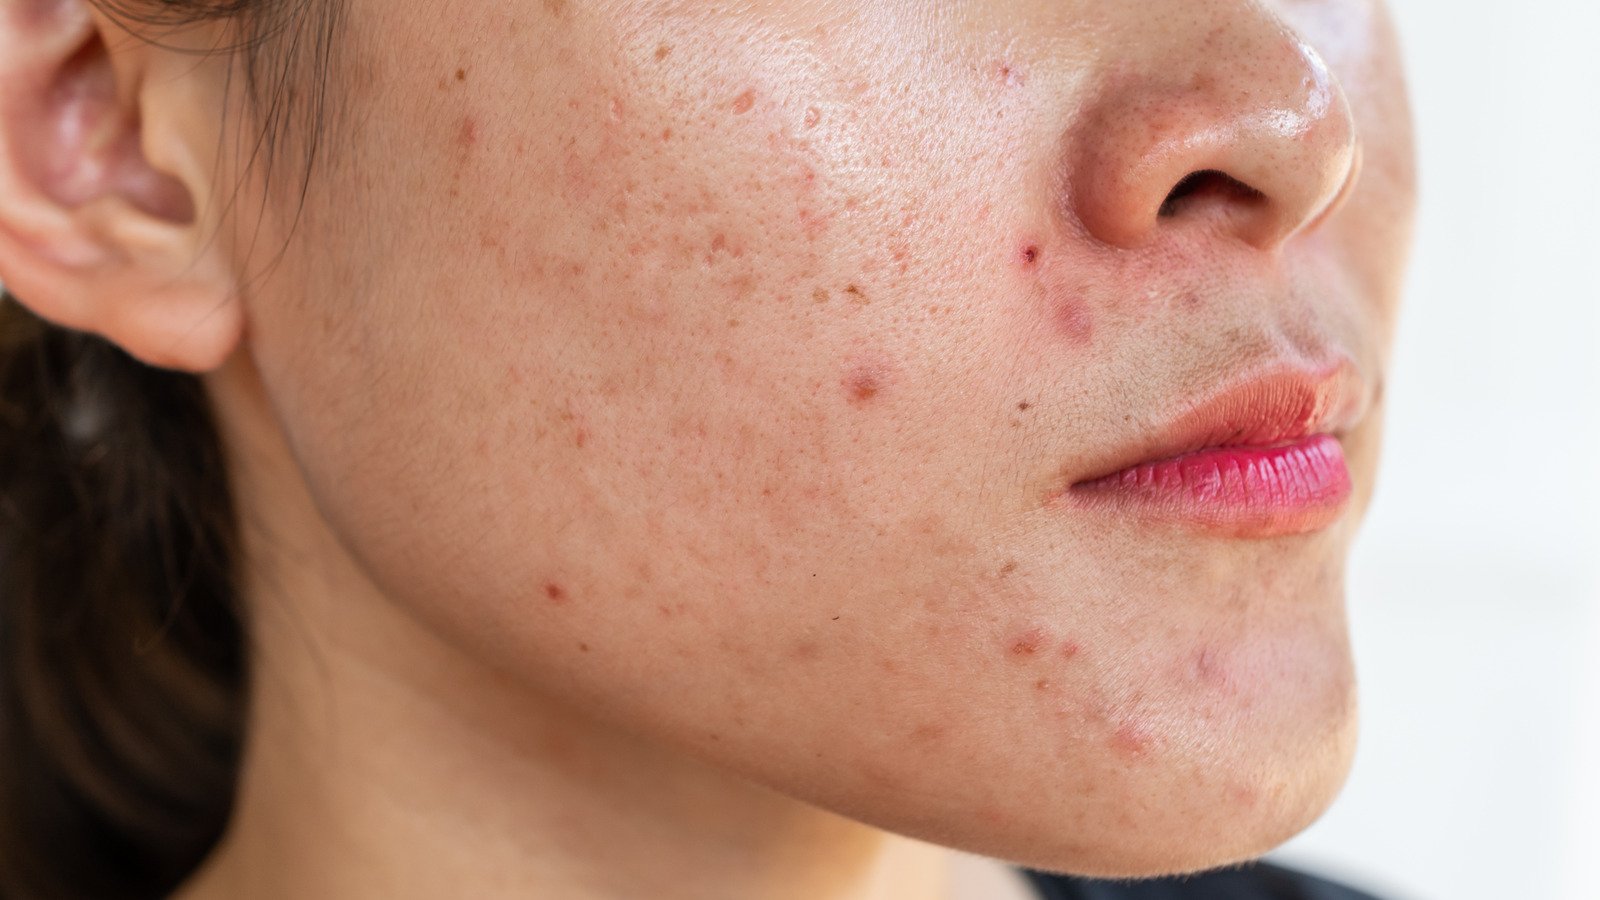 How To Identify The Different Types Of Acne